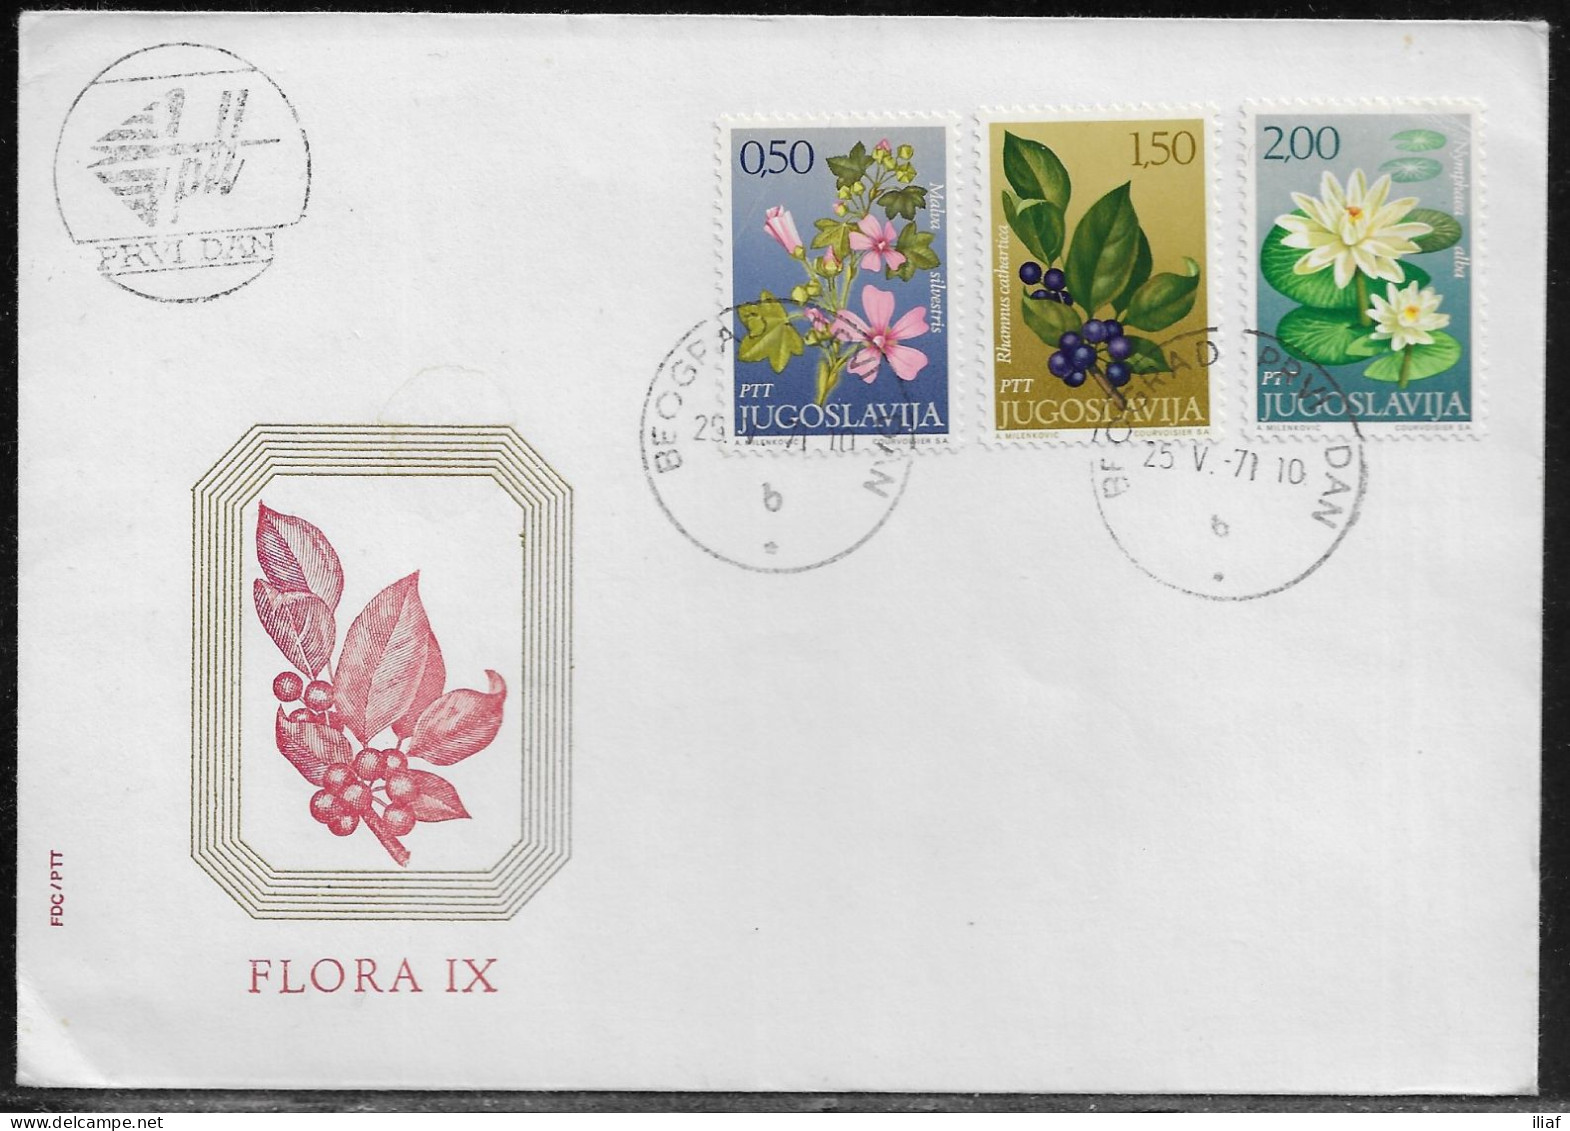 Yugoslavia FDC  Sc.  1056-1058.   Flowers (1971).  FDC Cancellation On FDC Envelope - FDC